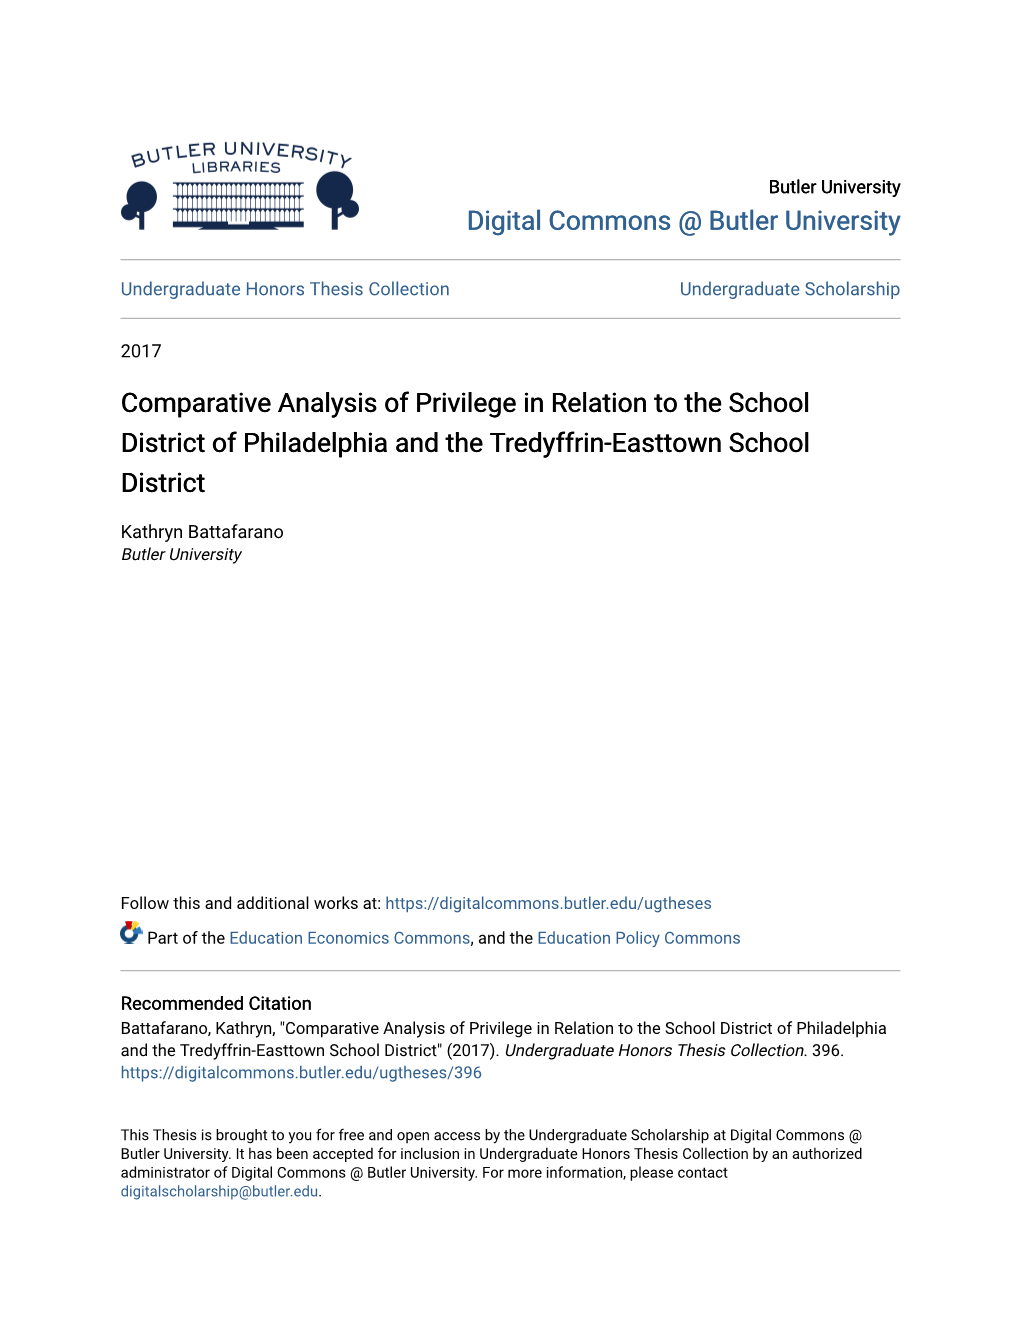 Comparative Analysis of Privilege in Relation to the School District of Philadelphia and the Tredyffrin-Easttown School District